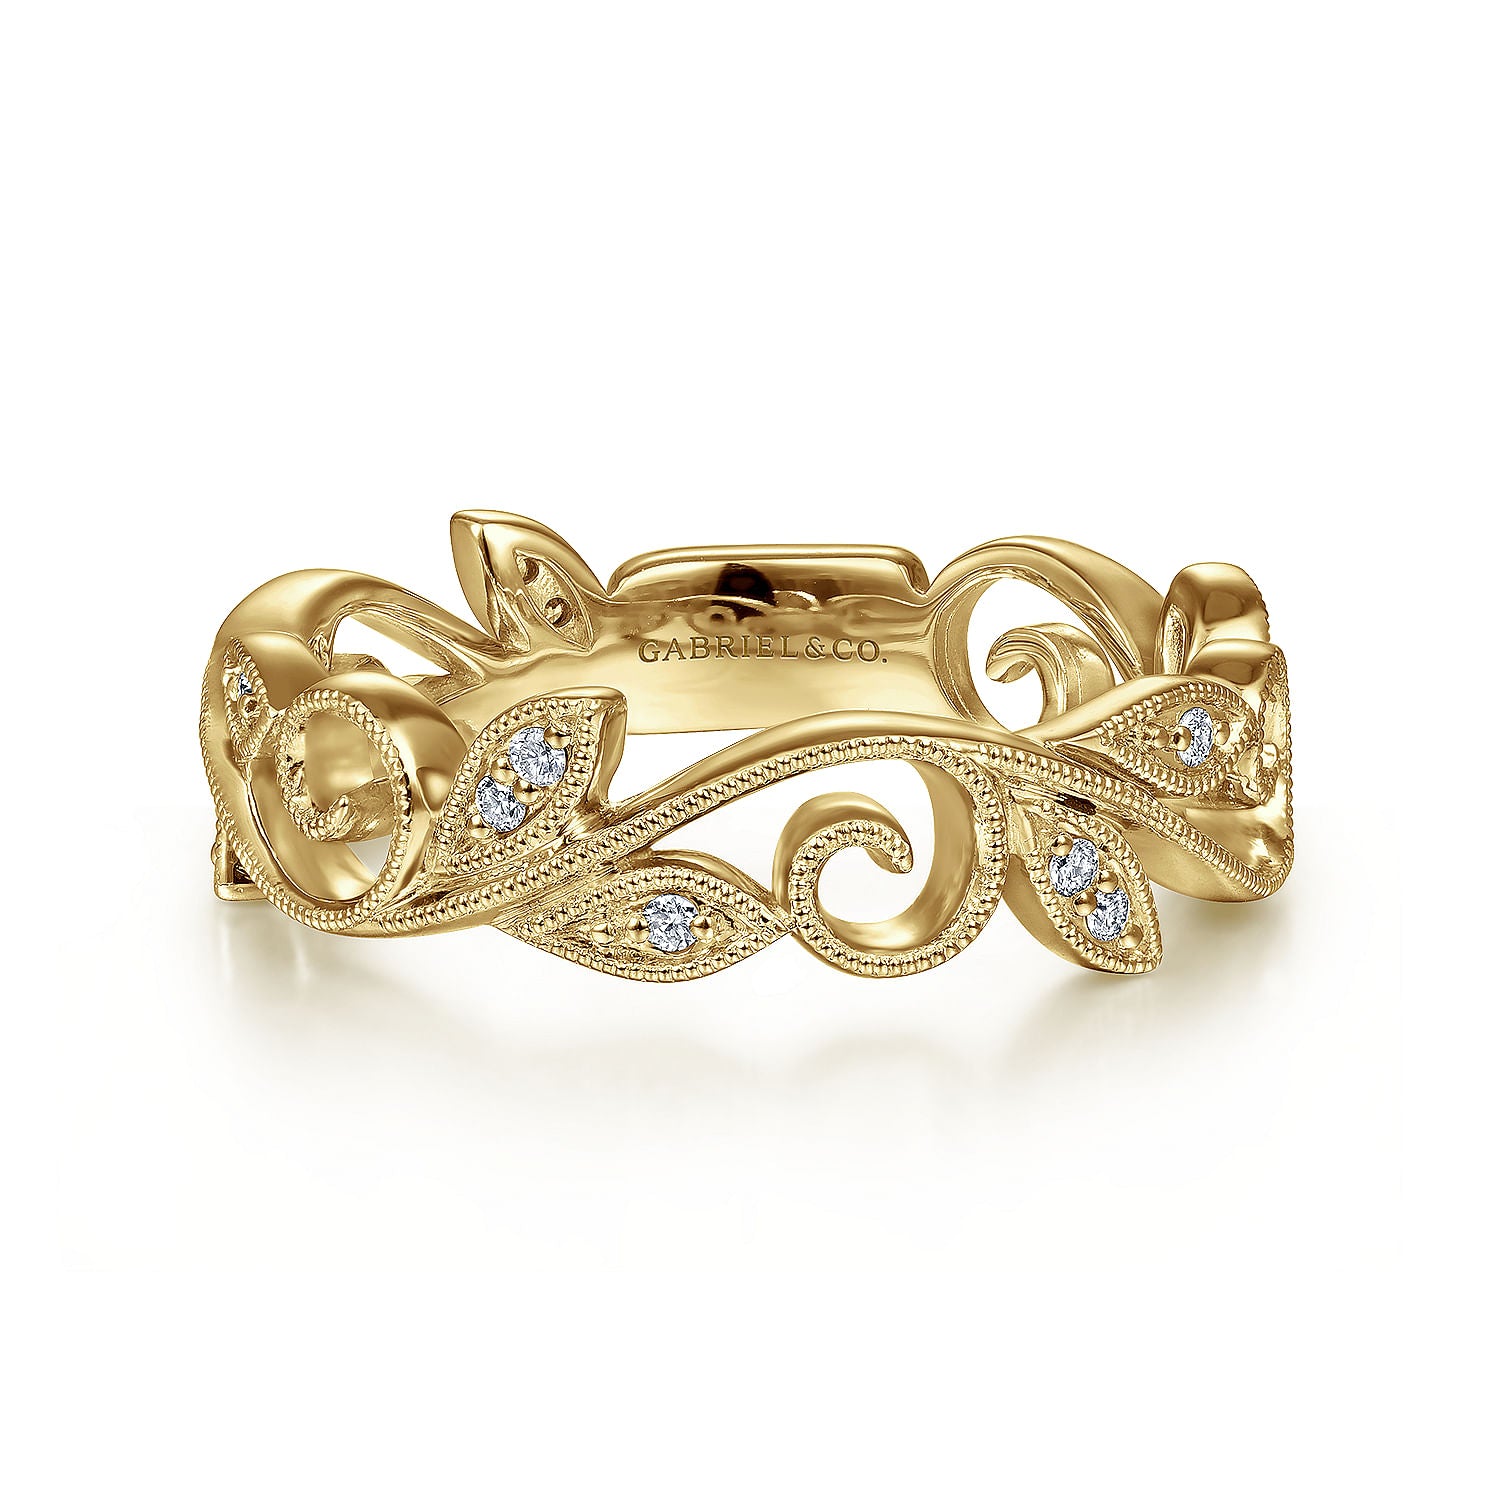 14K YELLOW GOLD SCROLLING FLORAL DIAMOND STACKABLE RING